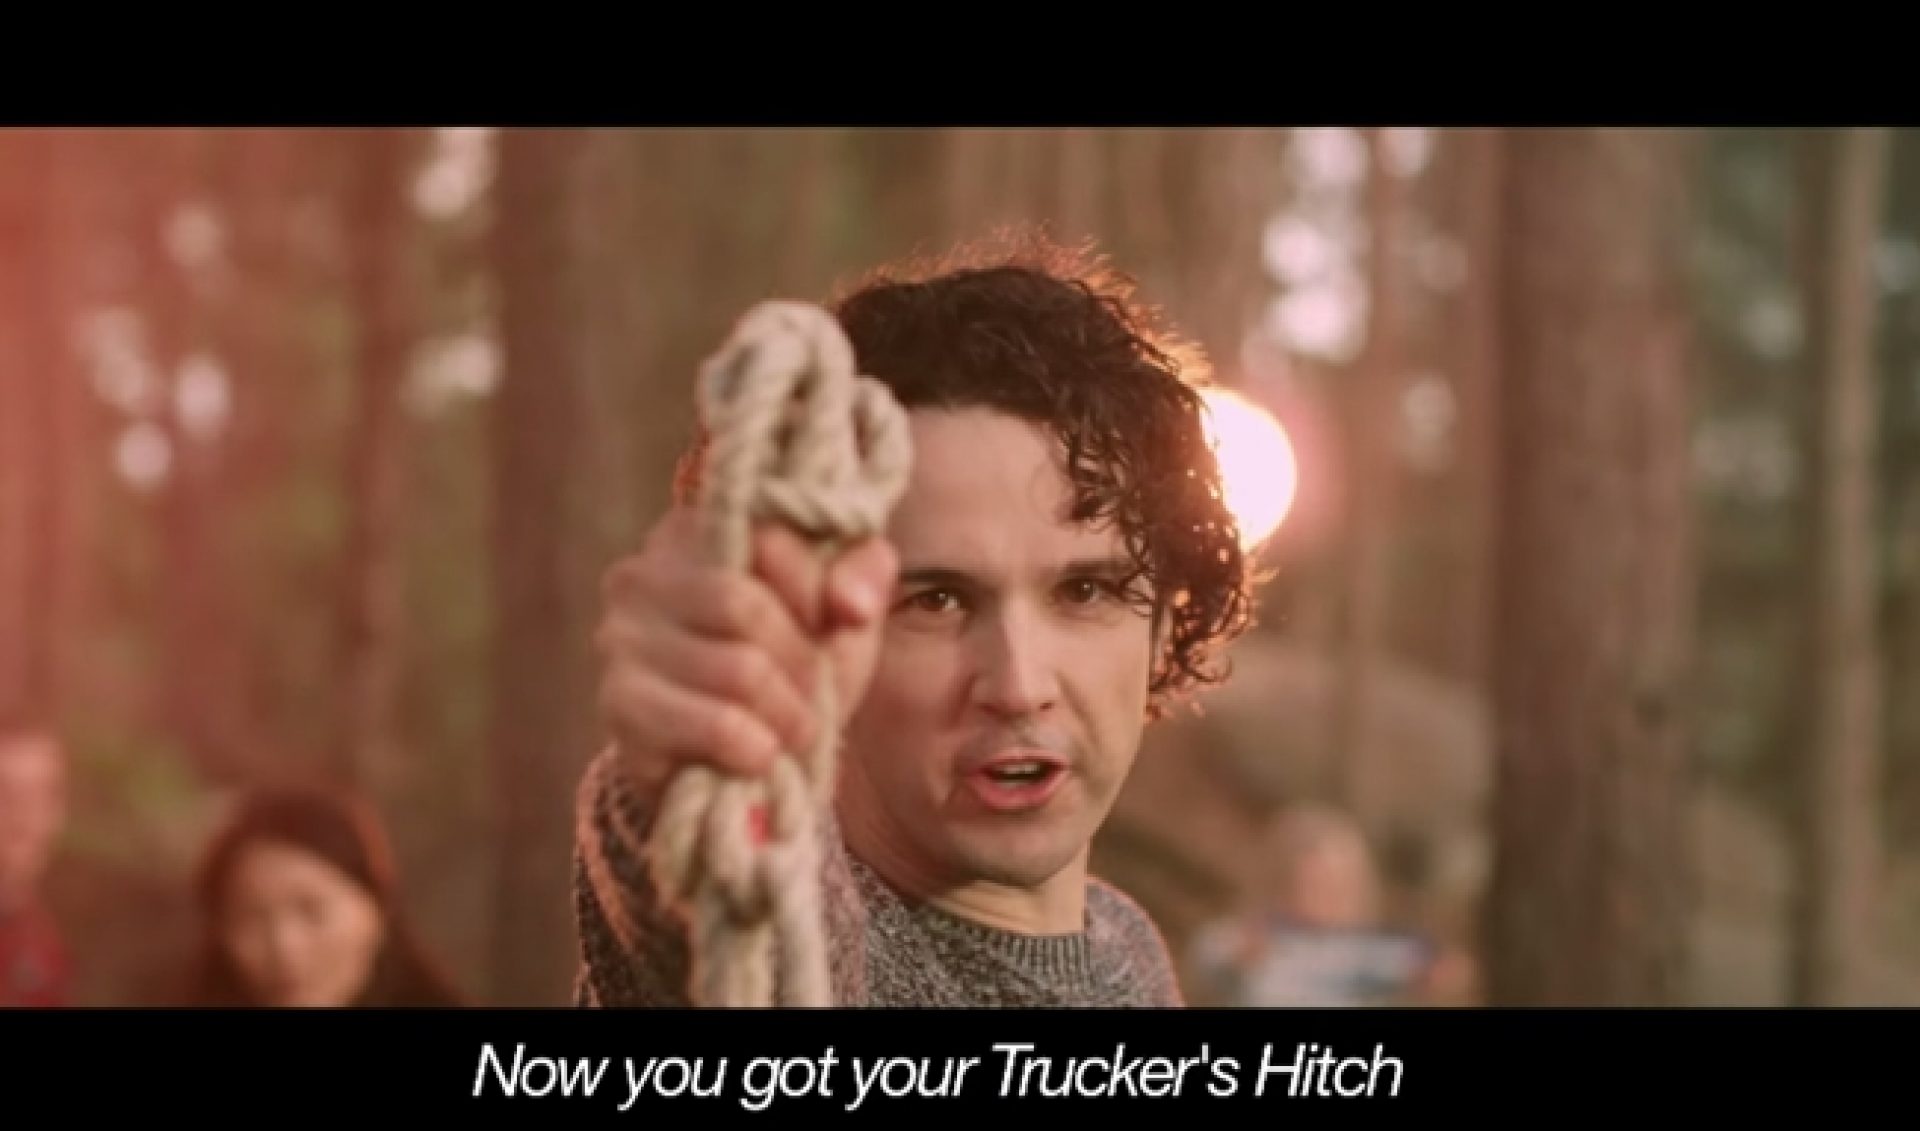 Ylvis (Of “The Fox” Fame) Tries To Turn Tying Knots Into A Dance Craze